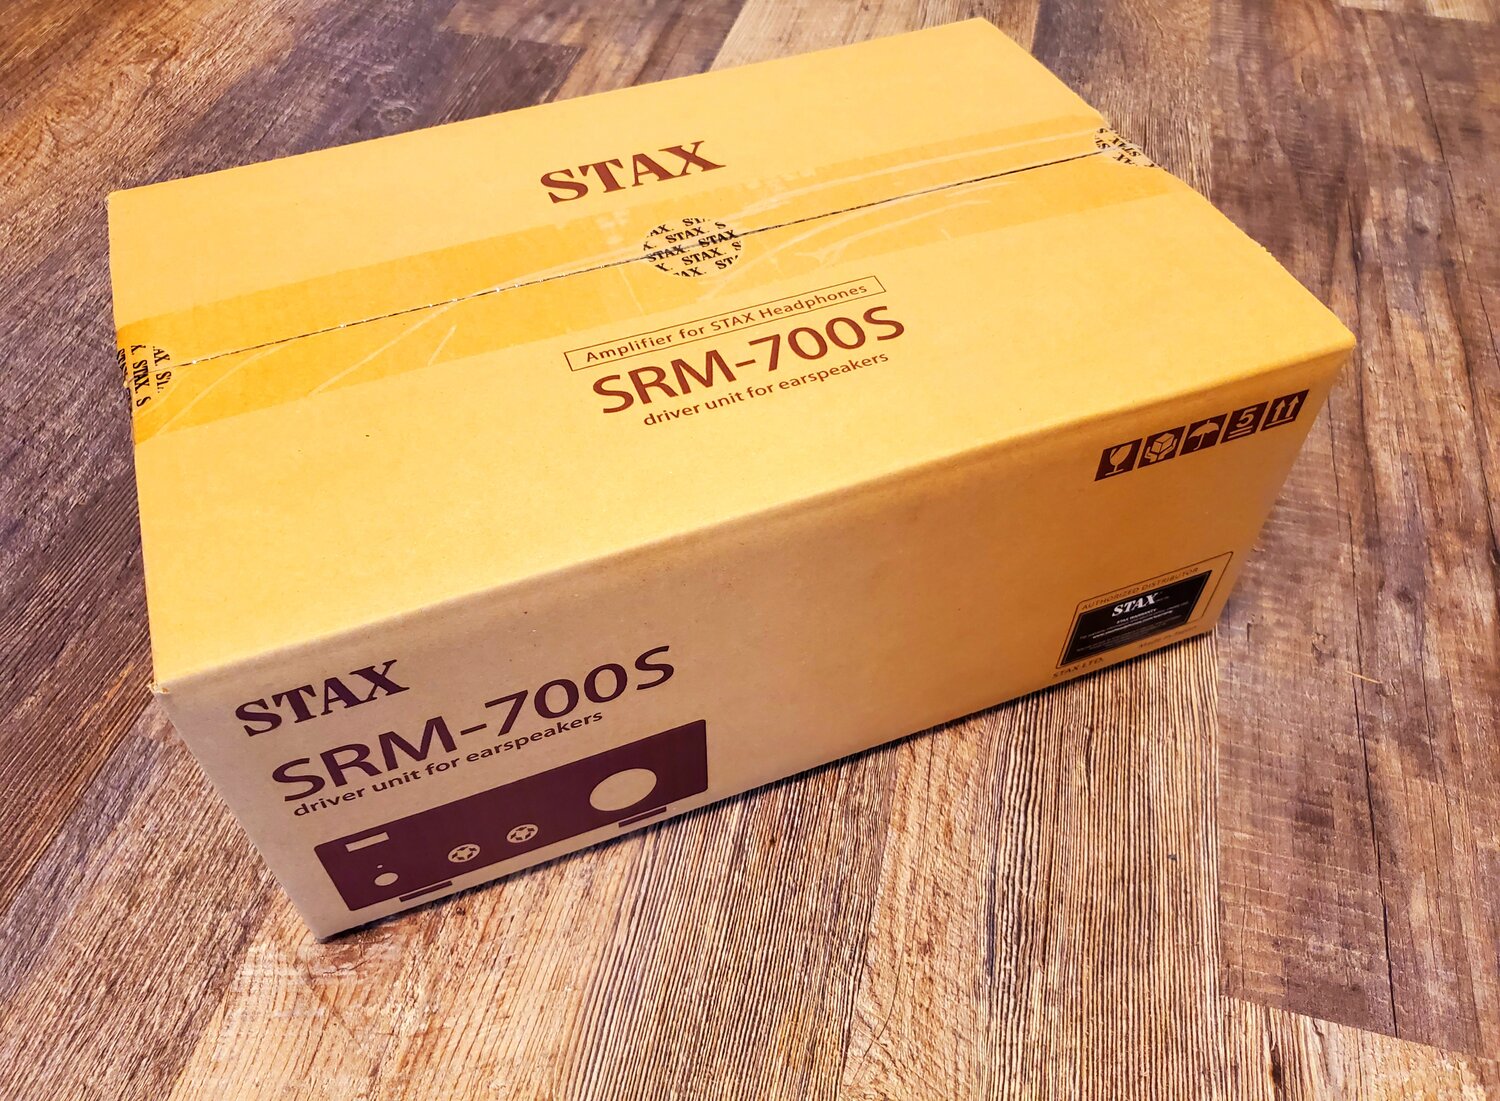 Yes, not the SRM-700T box but identical save the S. Packing tape all over the 700T box.